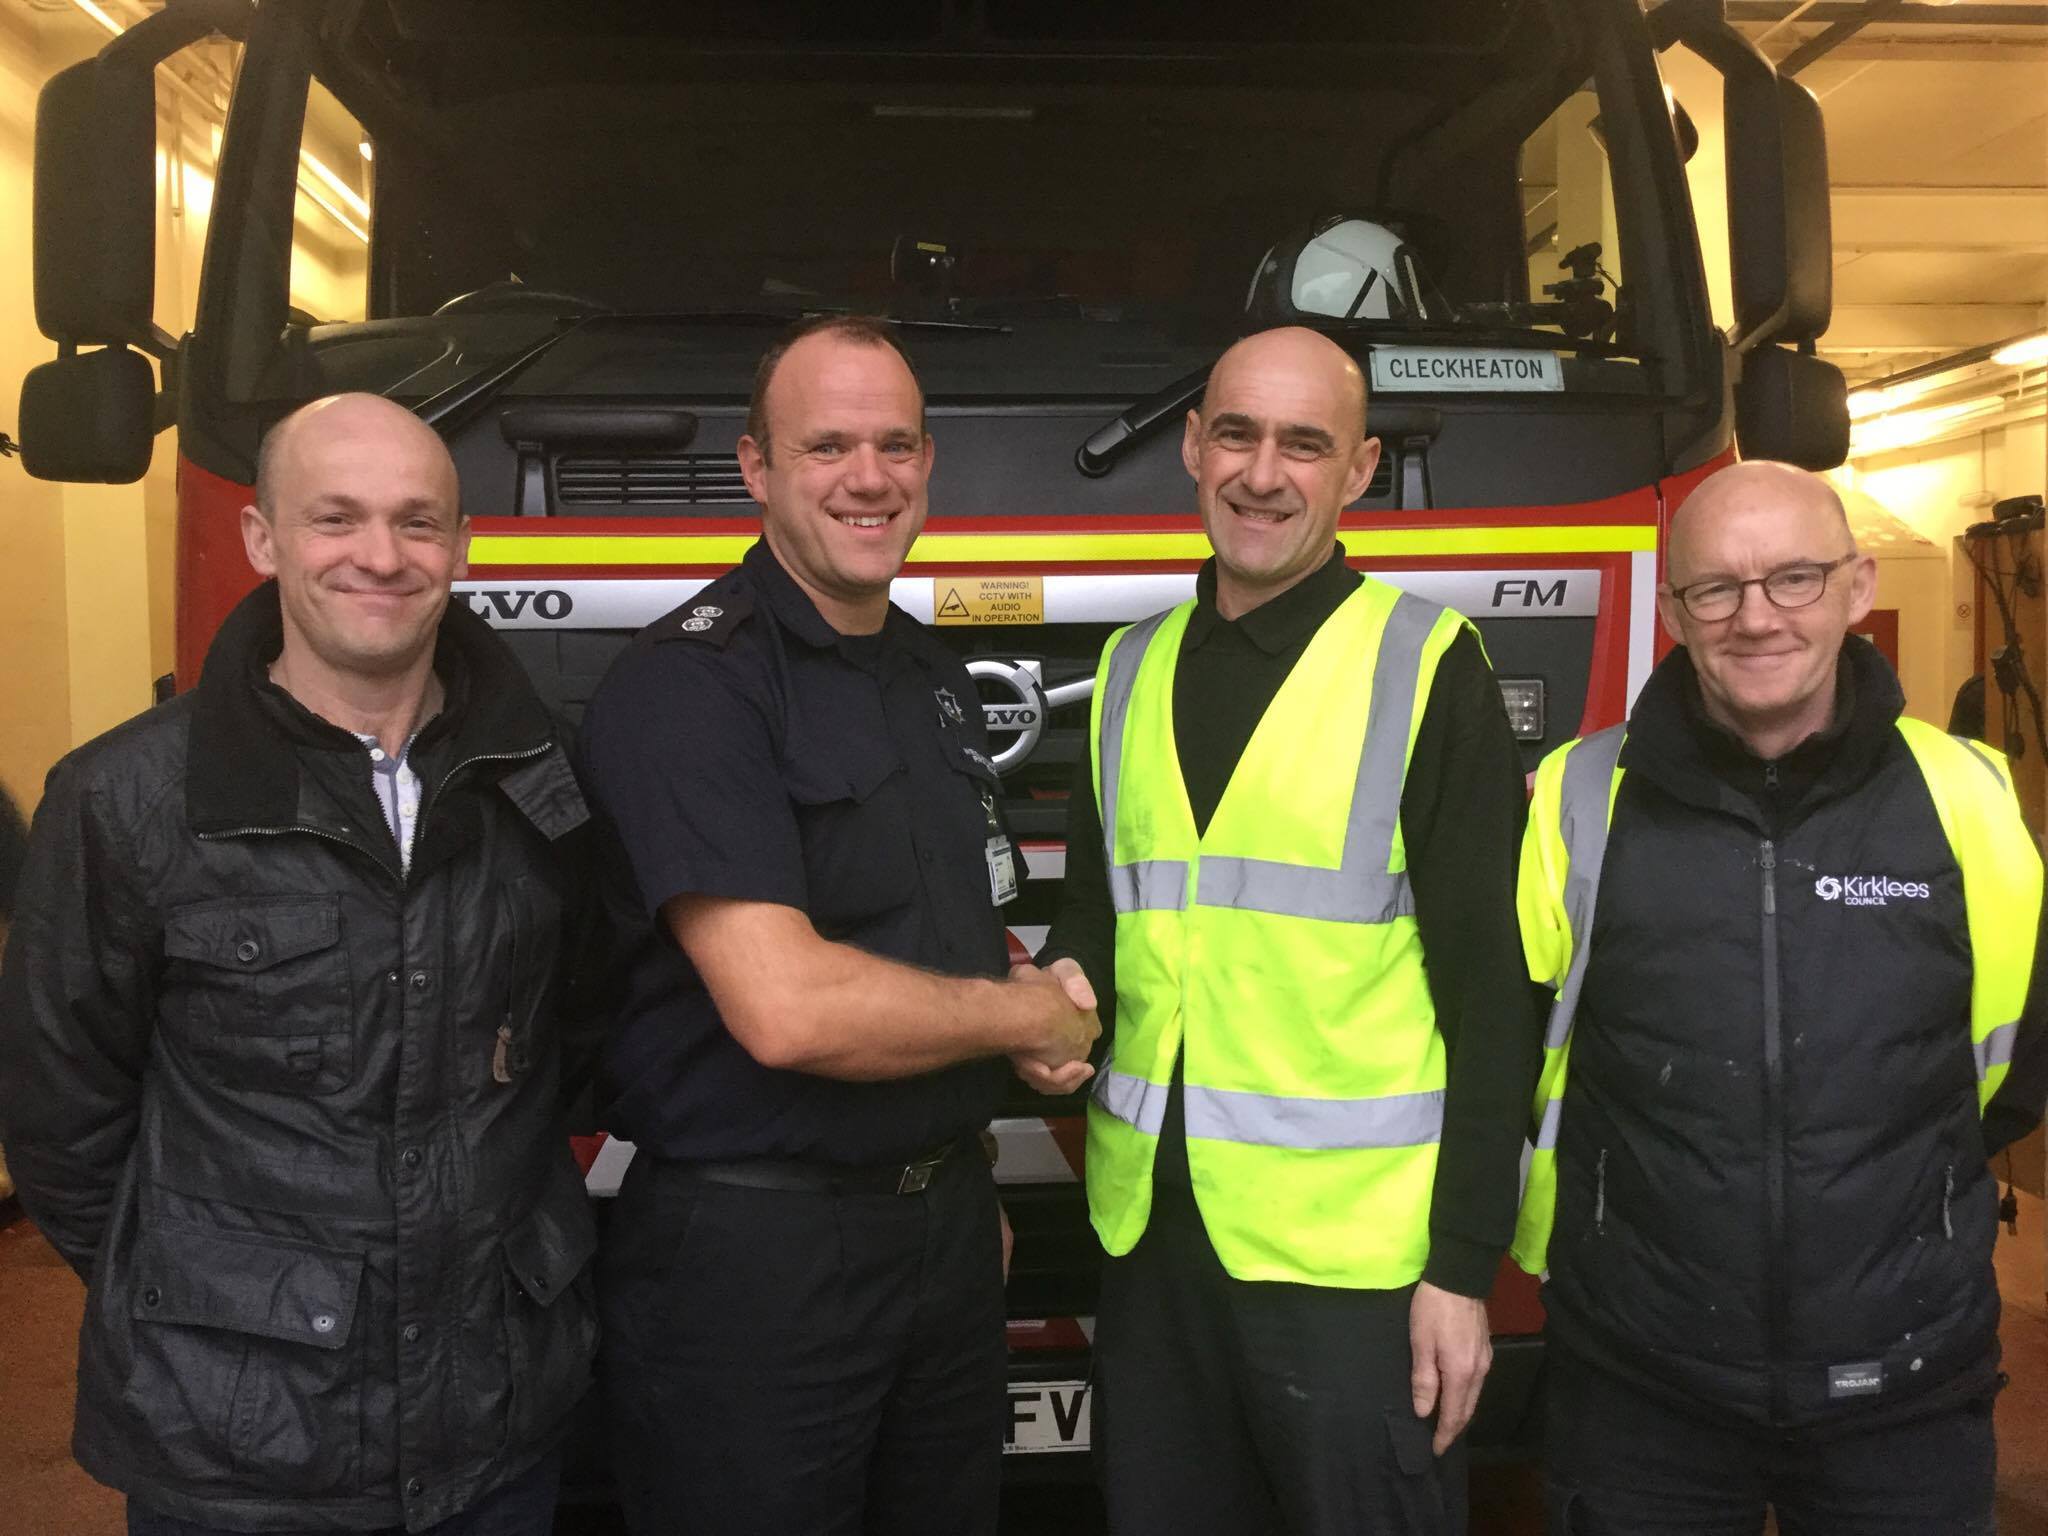 Trio of Good Samaritans praised for ‘brave’ actions in dramatic fire rescue